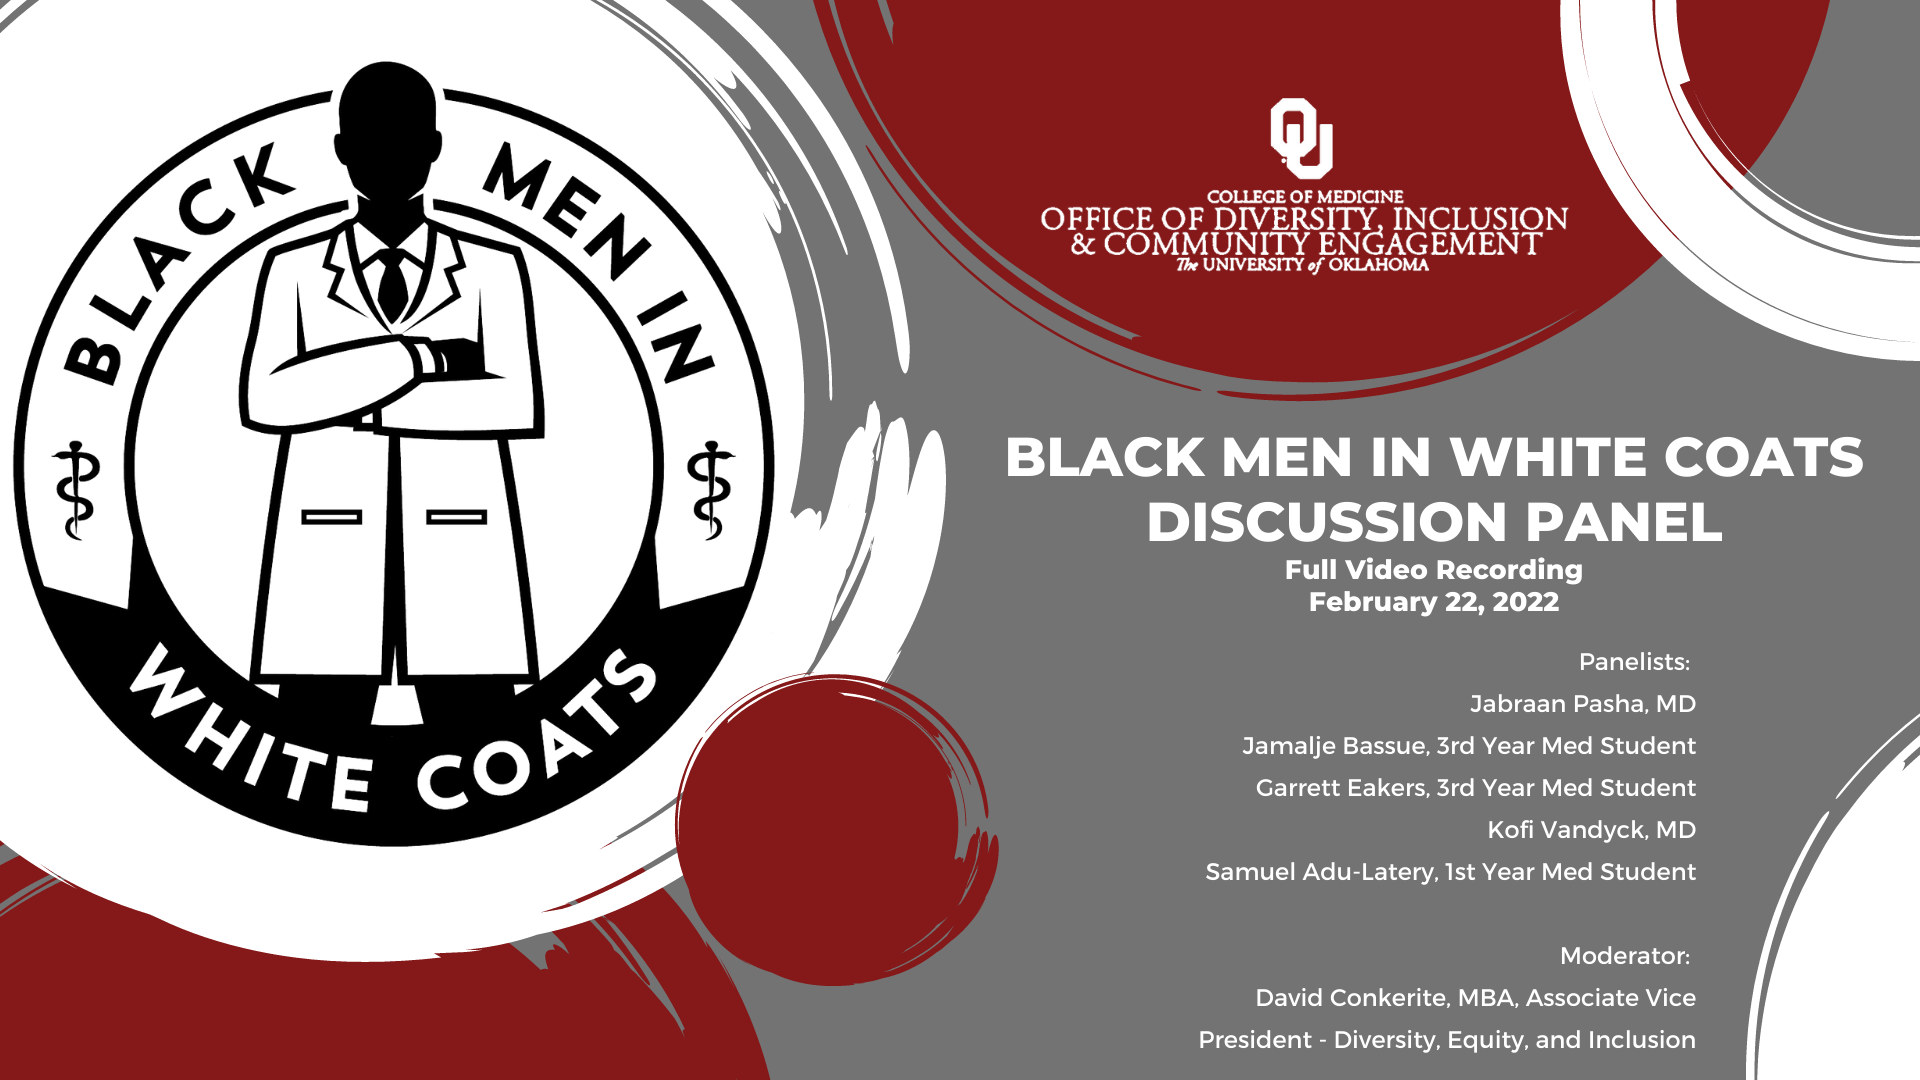 Black Men in White Coats Discussion Panel Video Recording Cover (1)